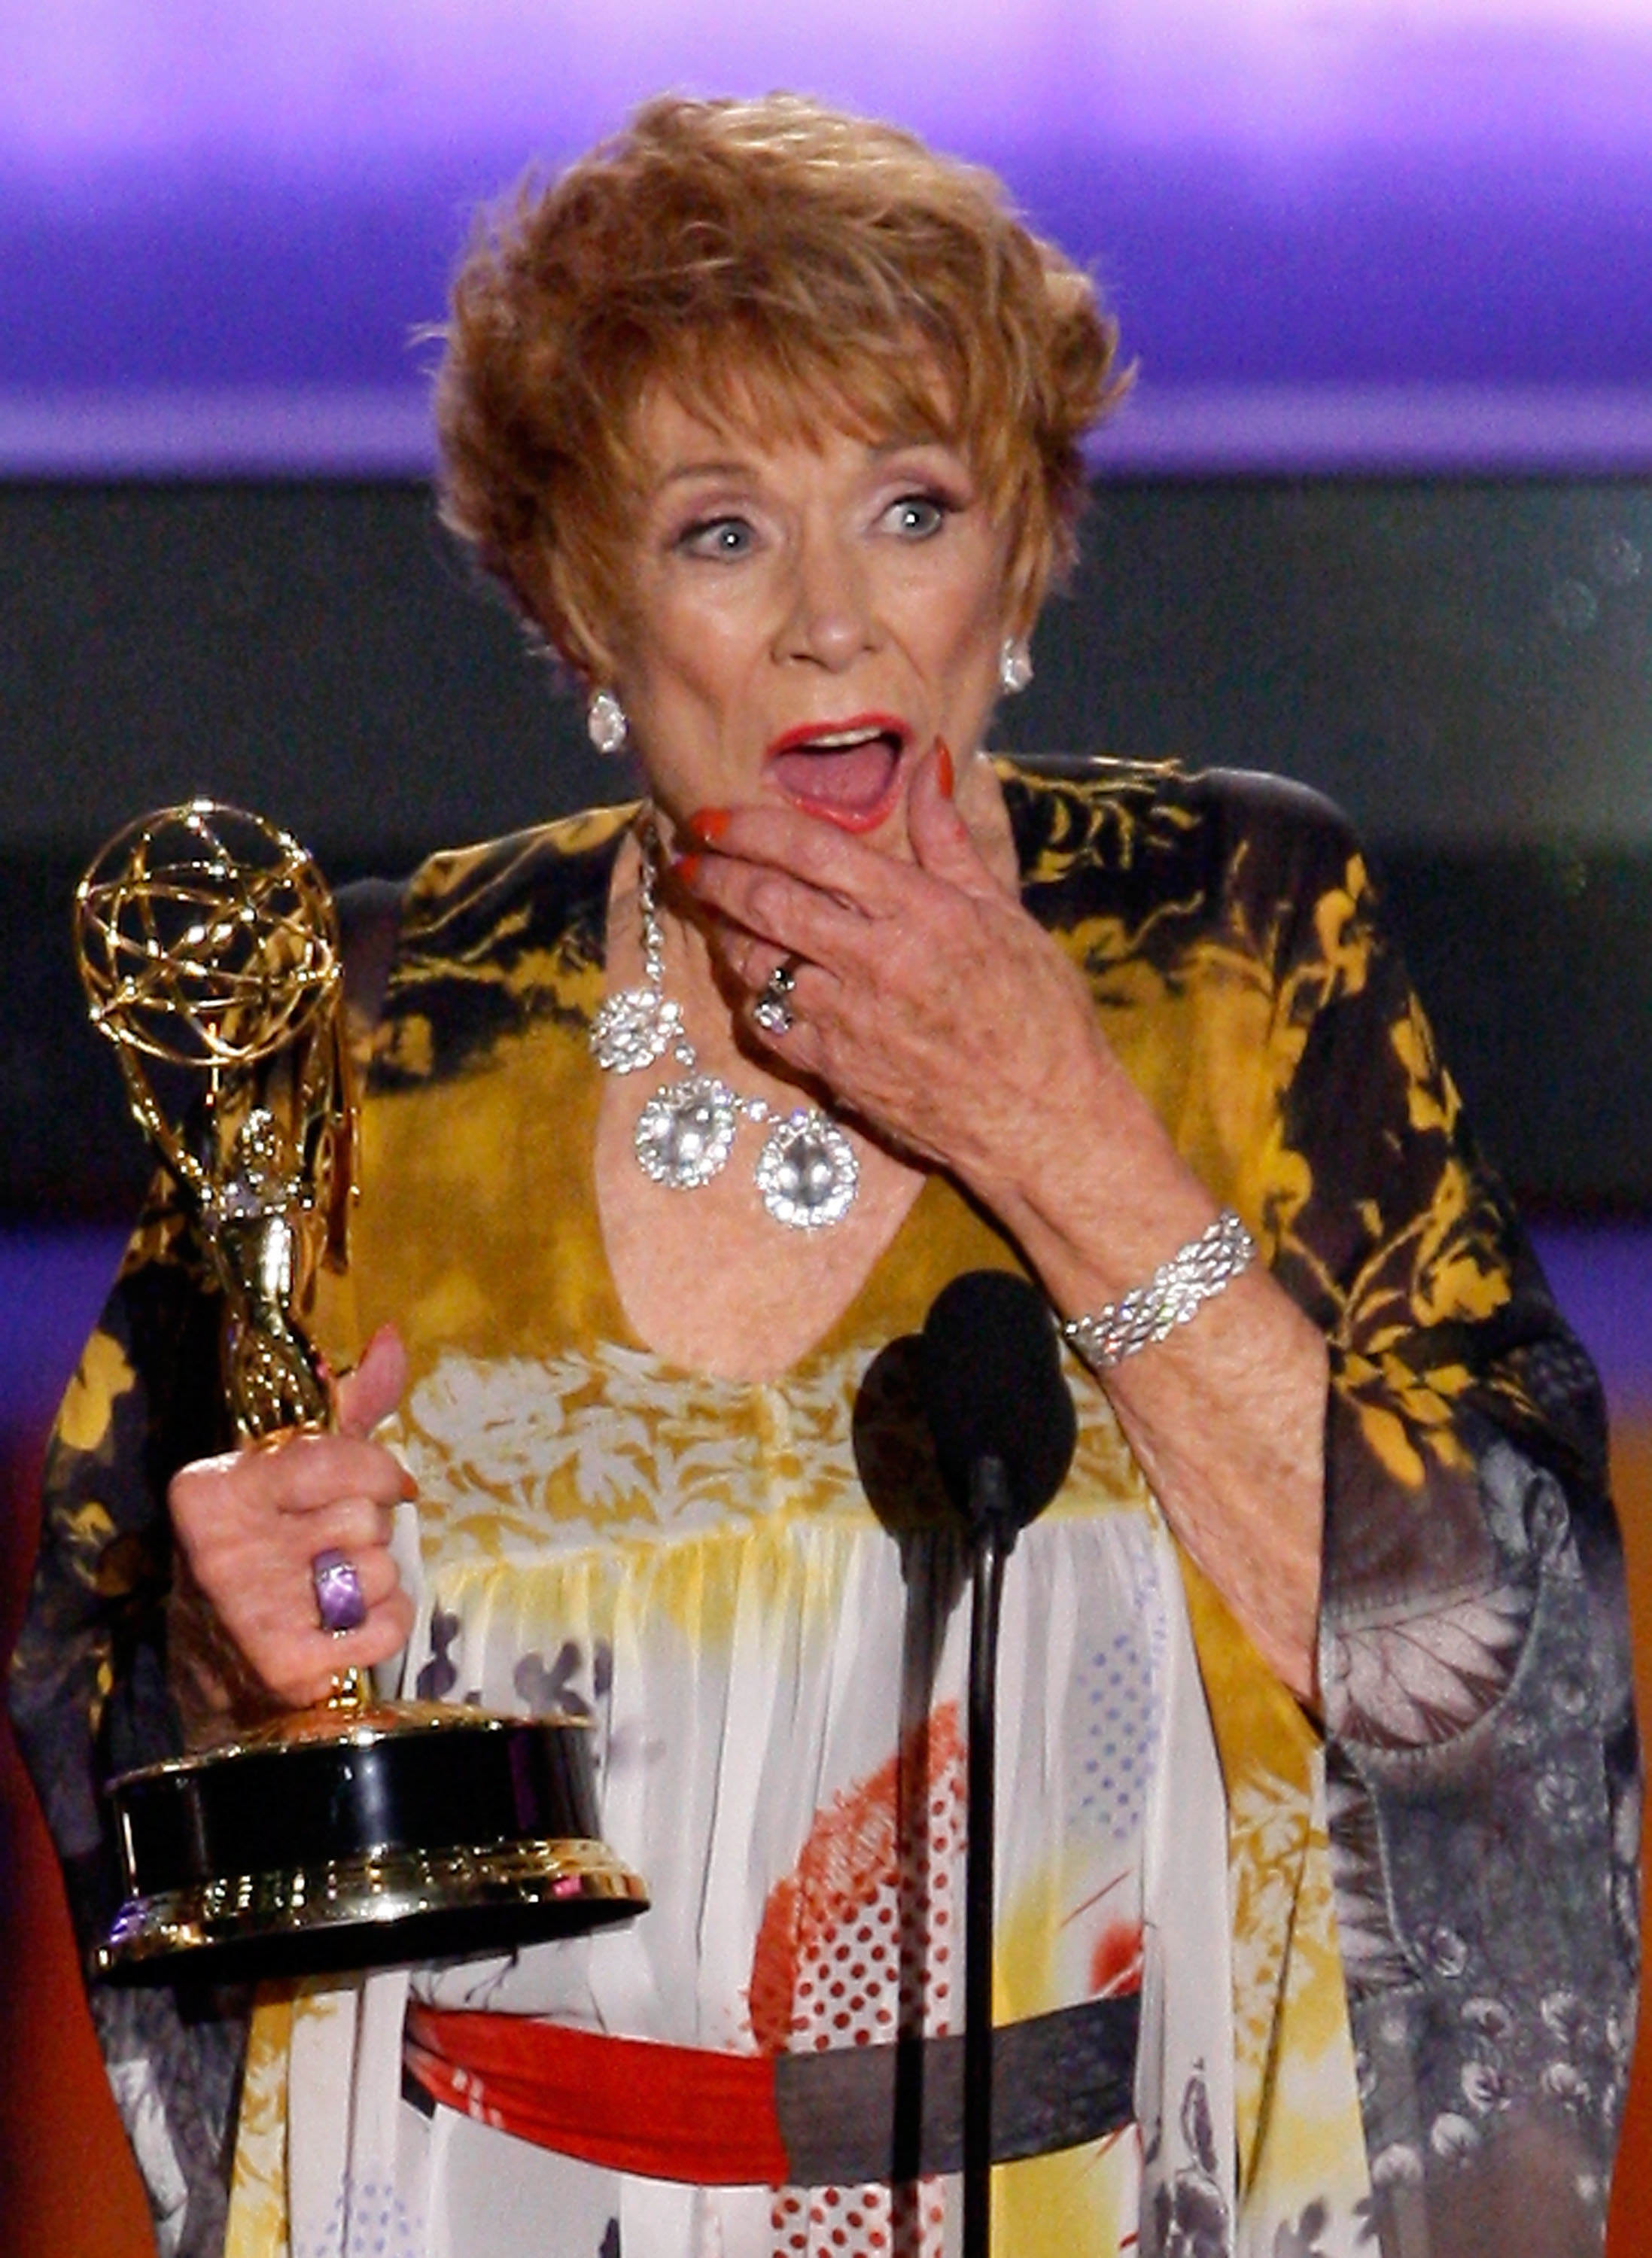 Jeanne Cooper accepting the Outstanding Lead Actress in a Drama Series award during the 35th Annual Daytime Emmy Awards held at the Kodak Theatre on June 20, 2008 in Hollywood, California | Source: Getty Images